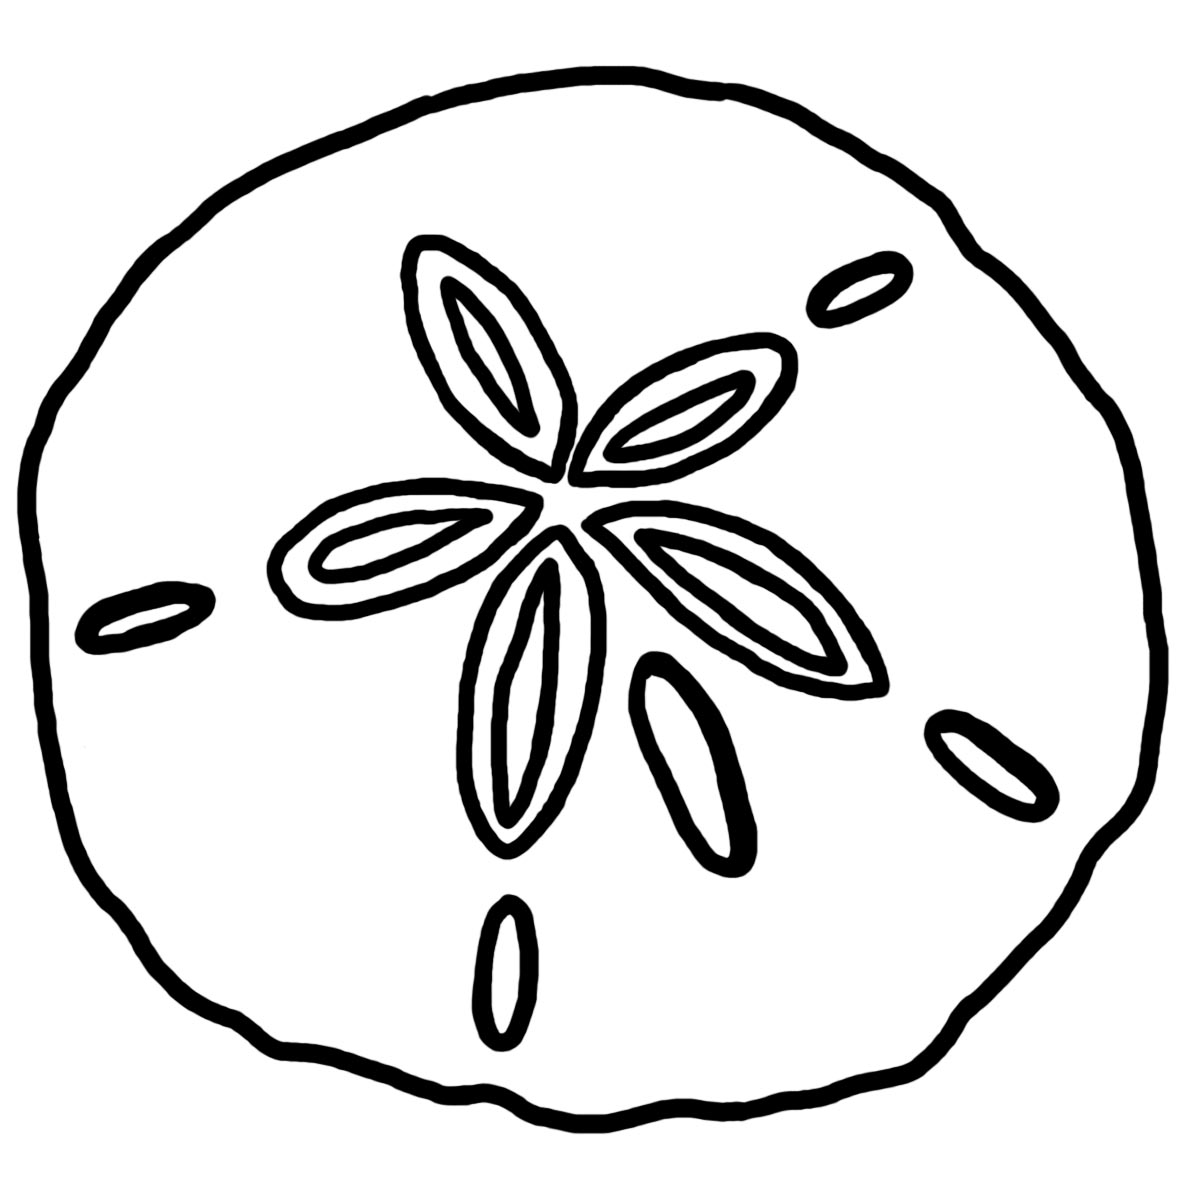 Sand Dollar Clipart Black And White   Clipart Panda   Free Clipart    